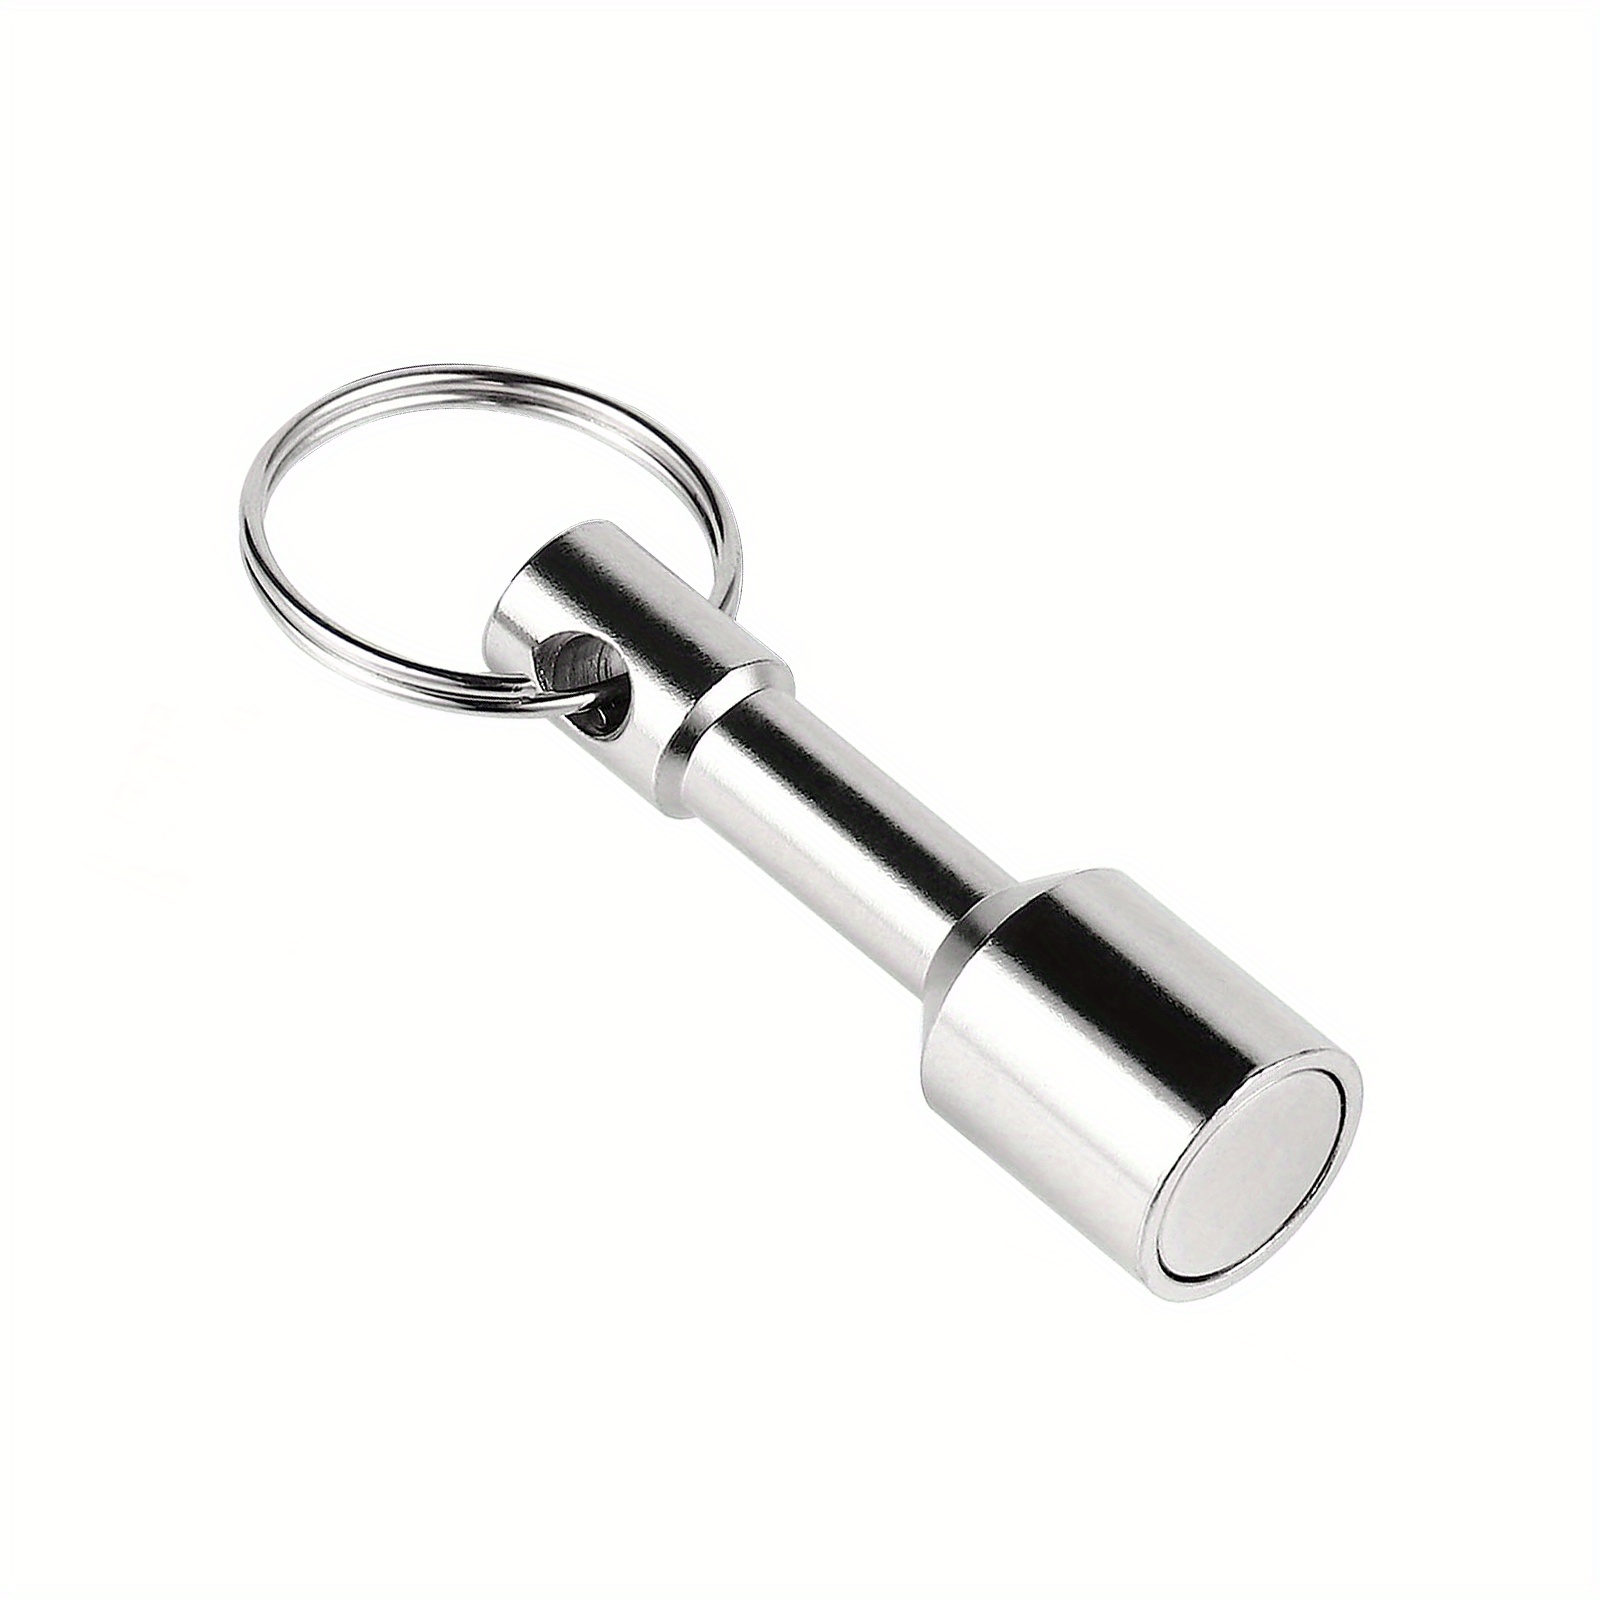 2pcs Keychain Magnet Tester Stainless Steel Strong Magnetic Key Ring